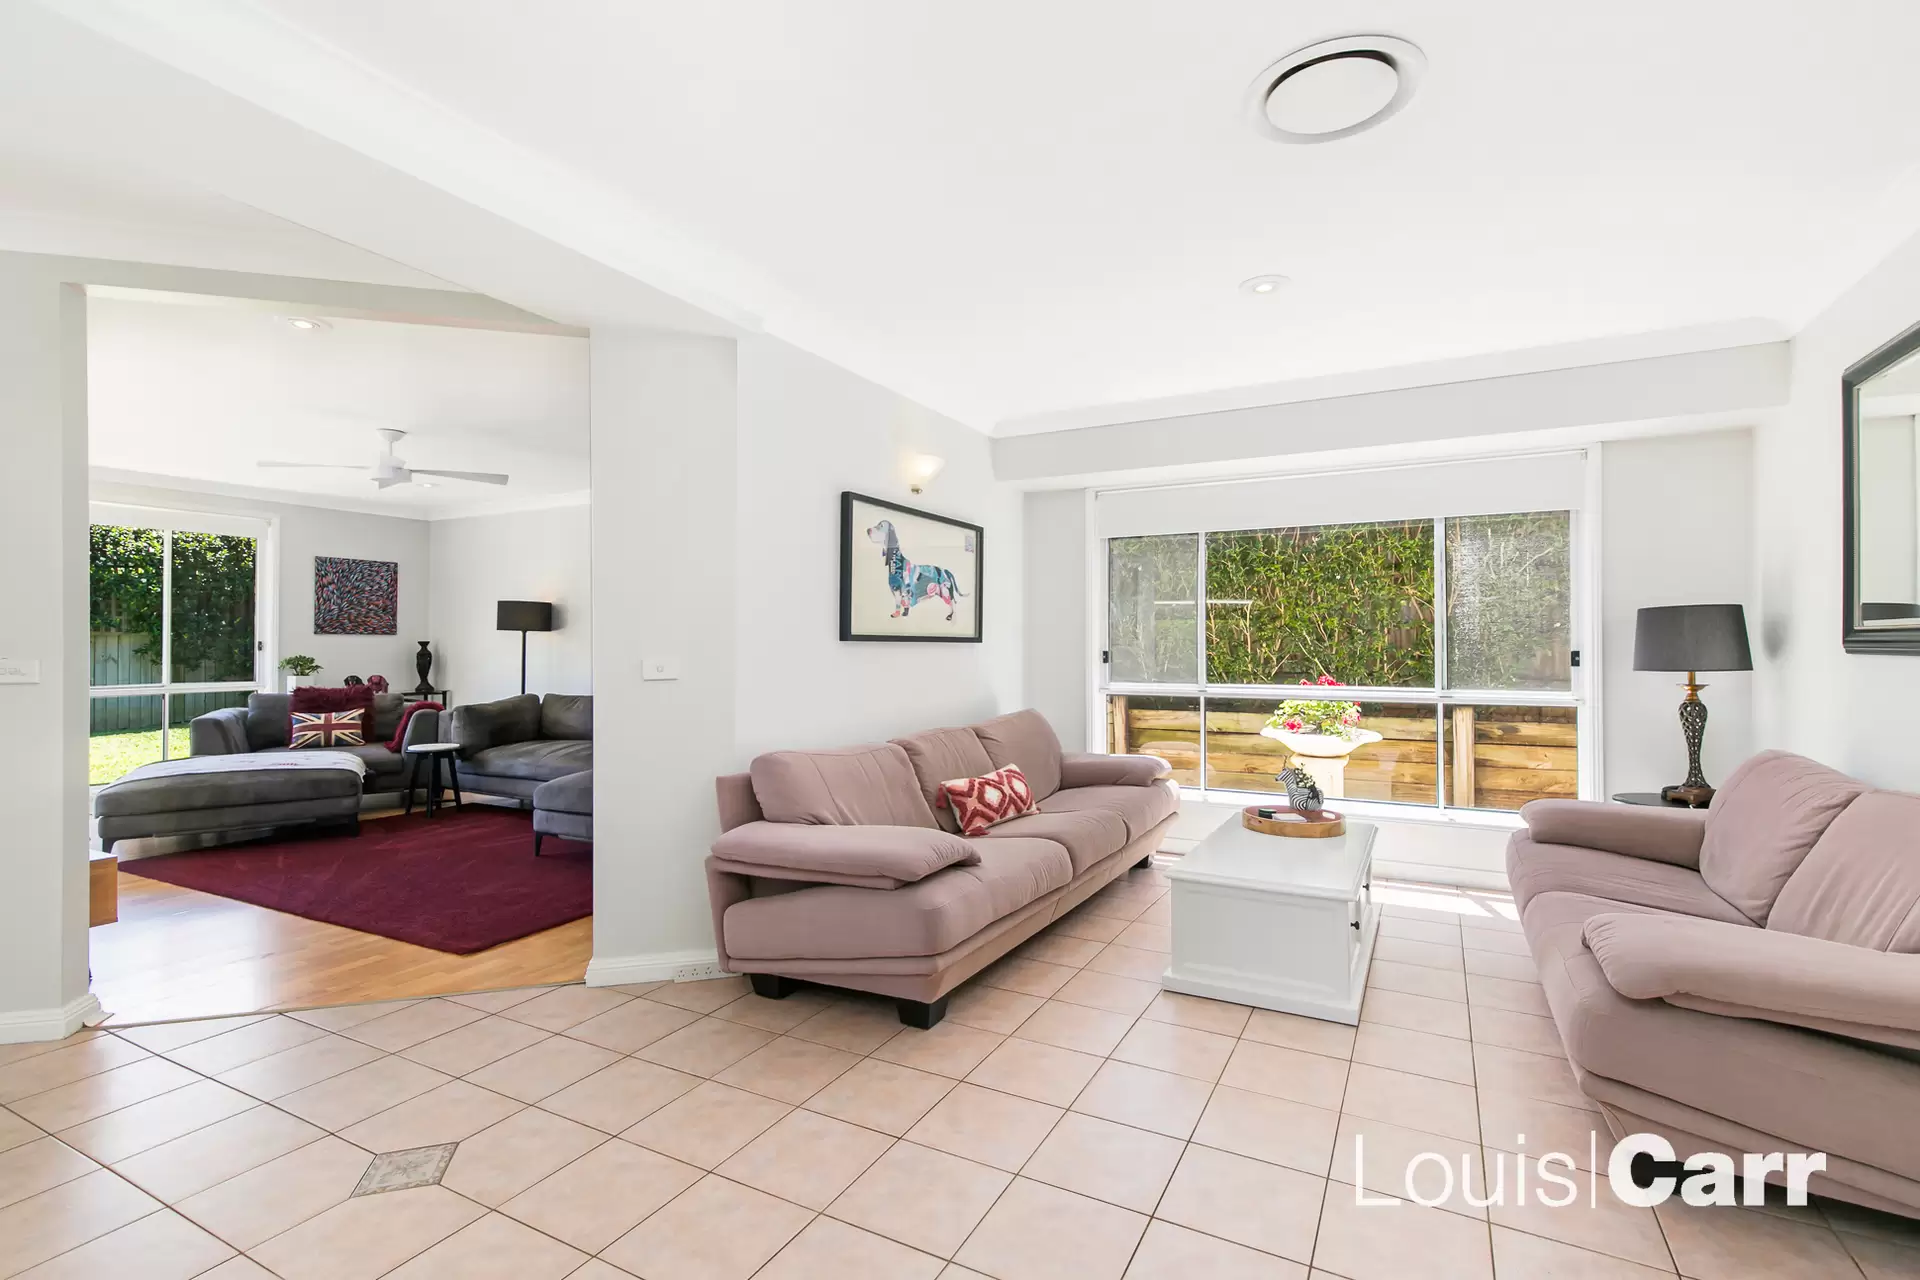 Photo #7: 13 Merelynne Avenue, West Pennant Hills - Sold by Louis Carr Real Estate